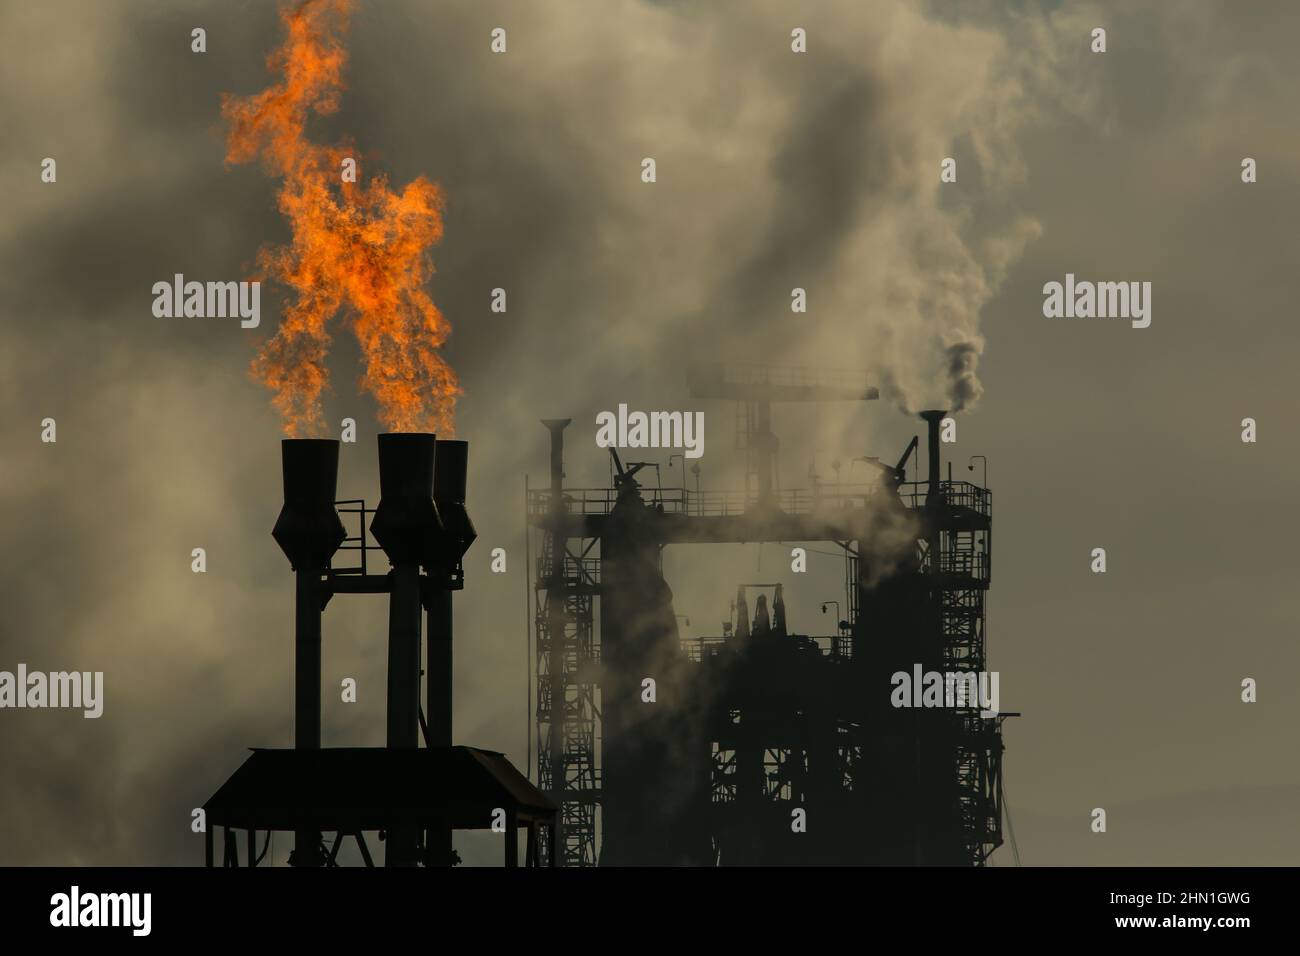 Heavy industry chimneys that produce smoke and fire. Air pollution illustration and damage to respiratory organs. Global warming and coal industry Stock Photo